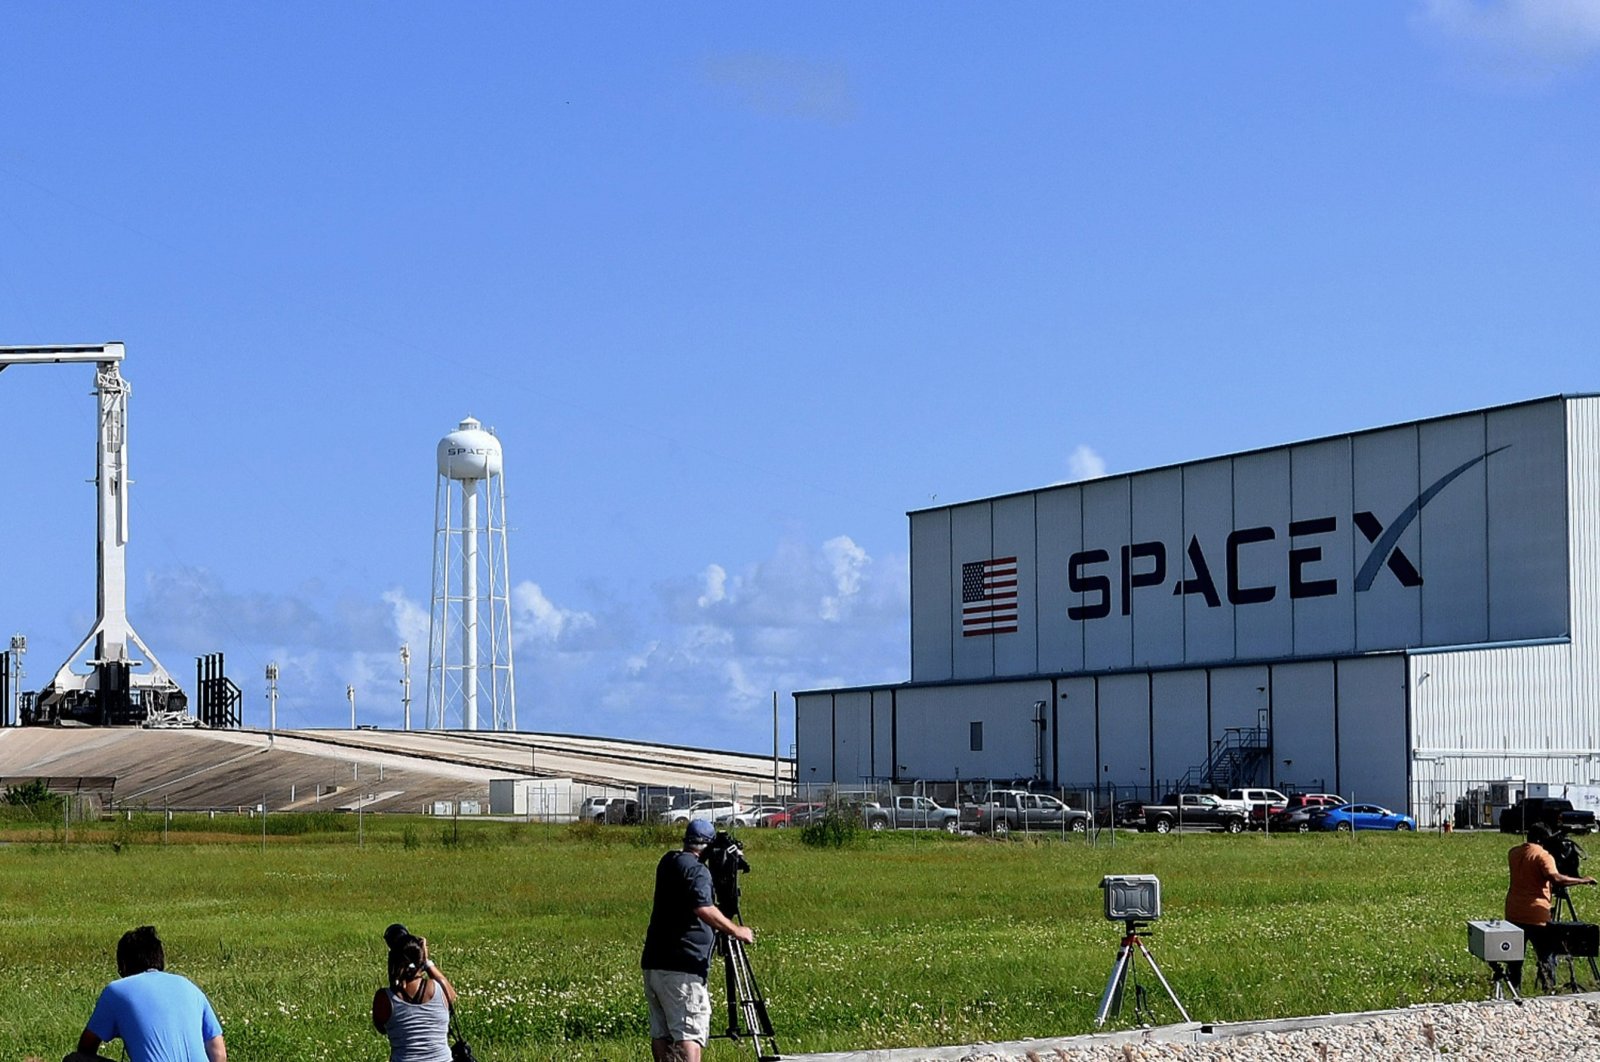 SpaceX prepares to launch the first time three-day trip around the world for four passengers with a non-astronaut rocket, Florida, U.S., Sept. 15, 2021. (Paul Hennessy via Anadolu Agency)